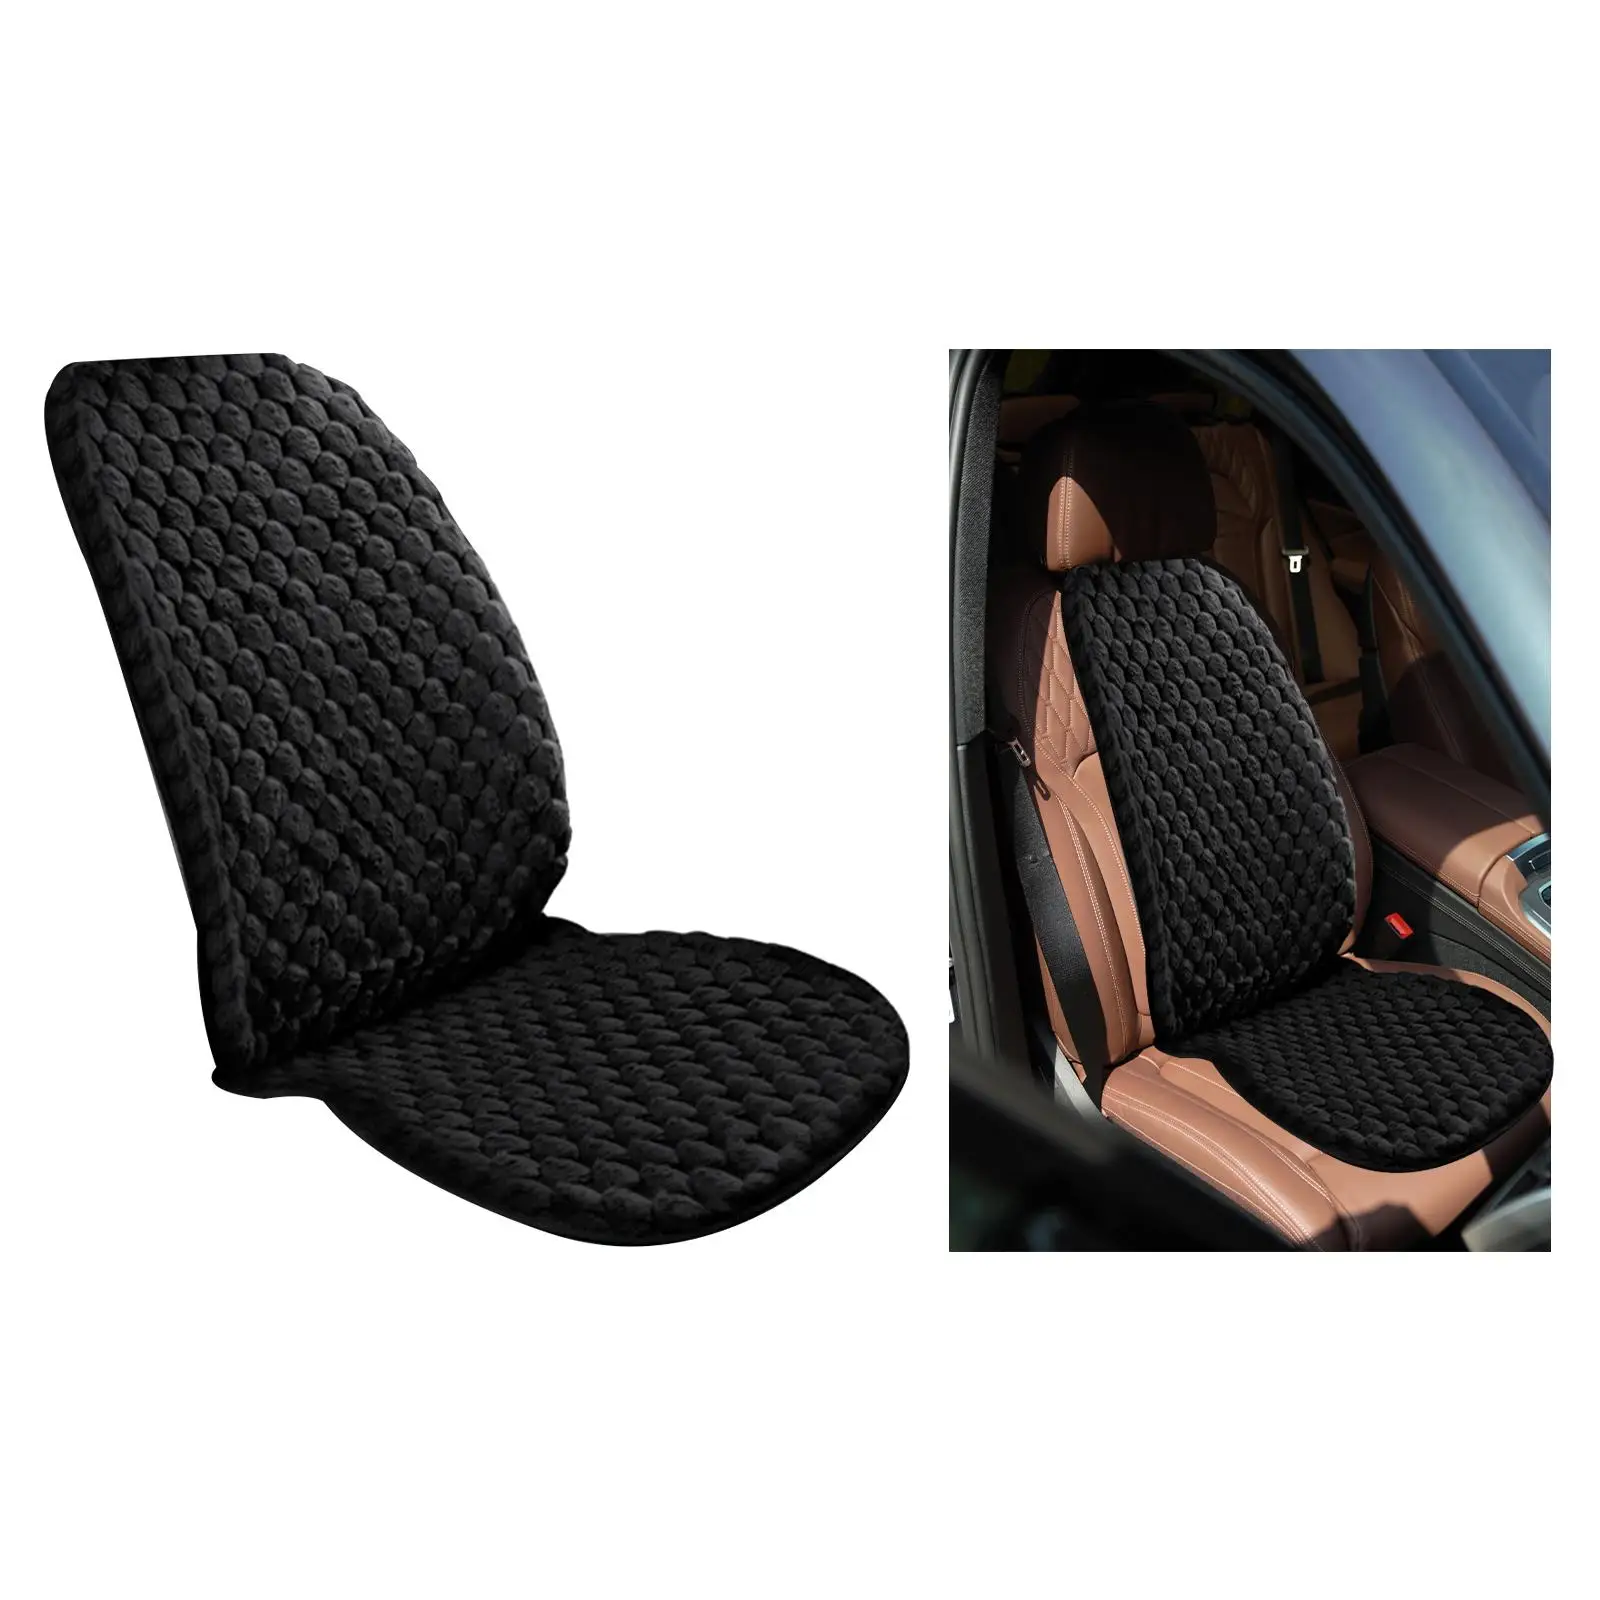 Car Seat Cover Universal Warm Anti Slip Mat for Truck Chair Office